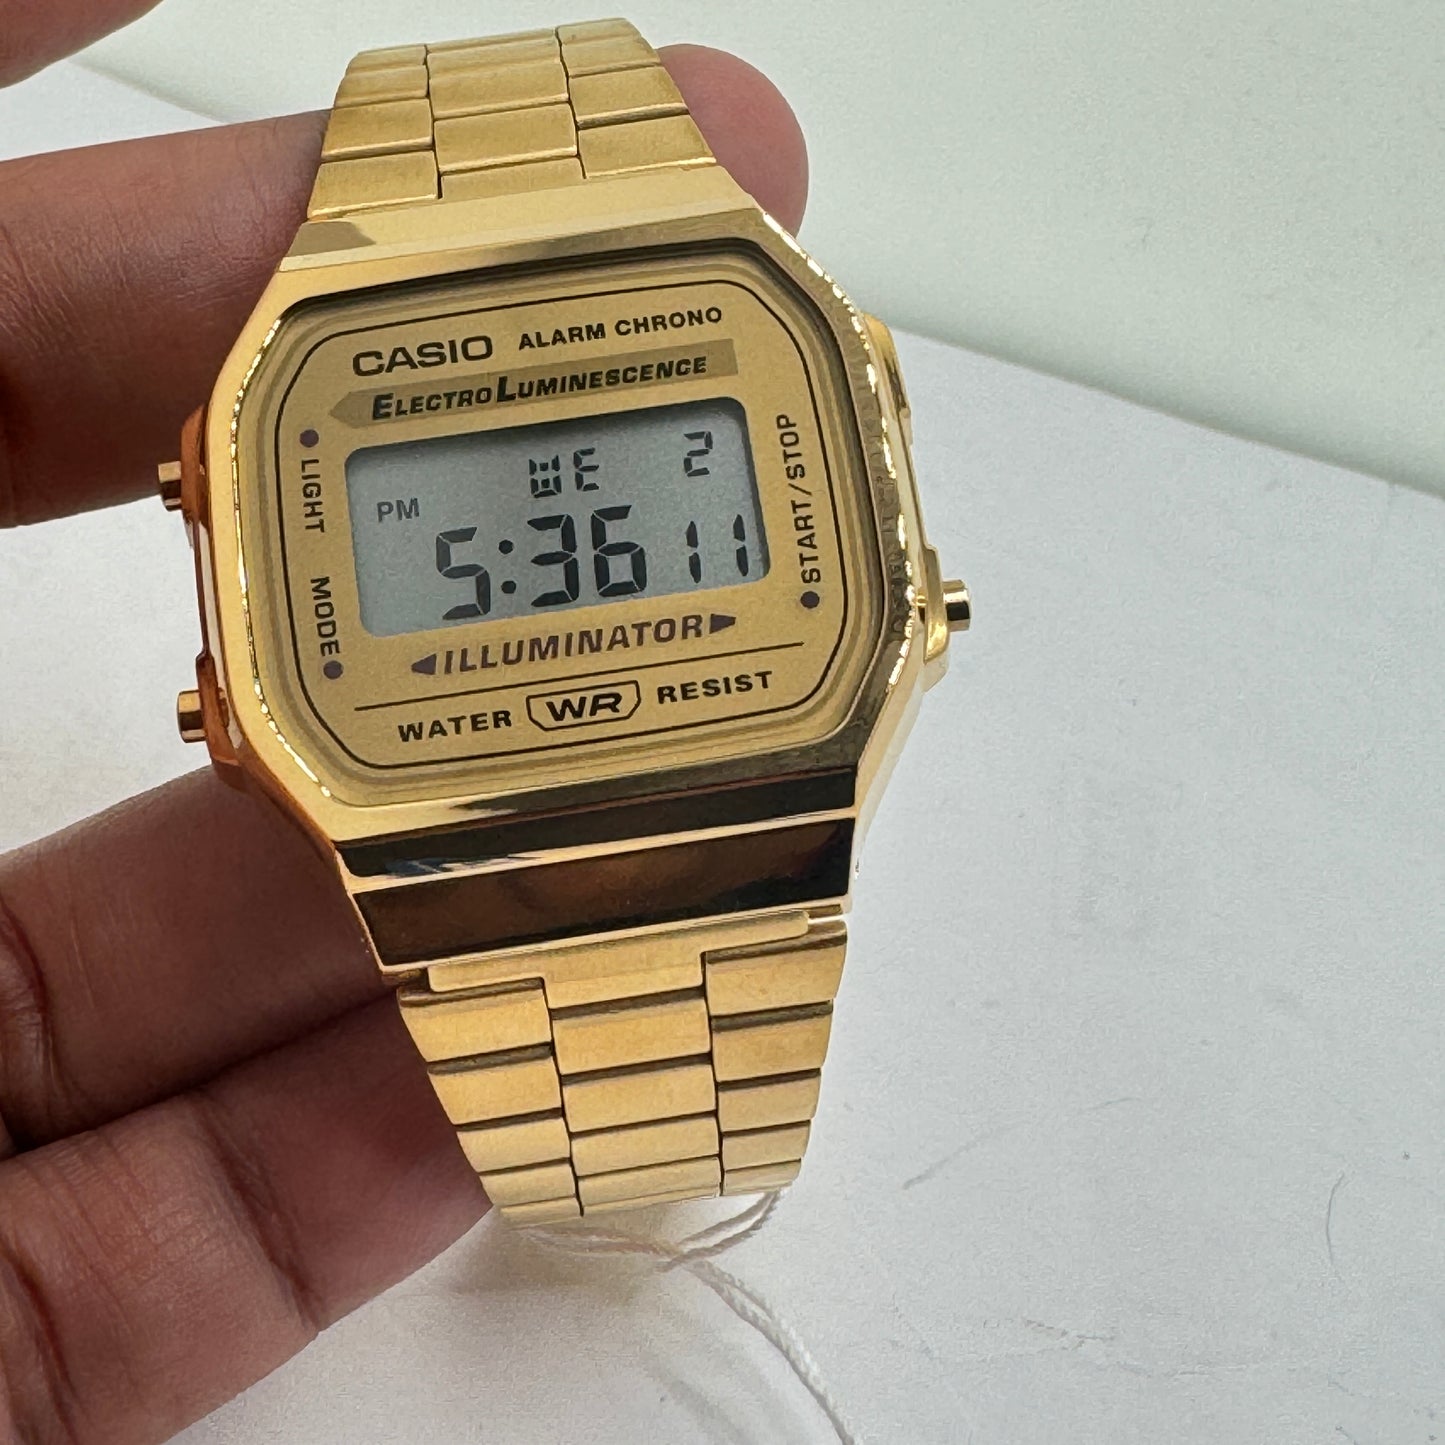 Casio Goldtone Watch , Unisex Size , Adjustable Band , Band Expand up to 8 inches Long, 35mm Diameter&nbsp;  New Item  Stainless Steel&nbsp;  Goldtone Color&nbsp;  Brand New Item&nbsp;